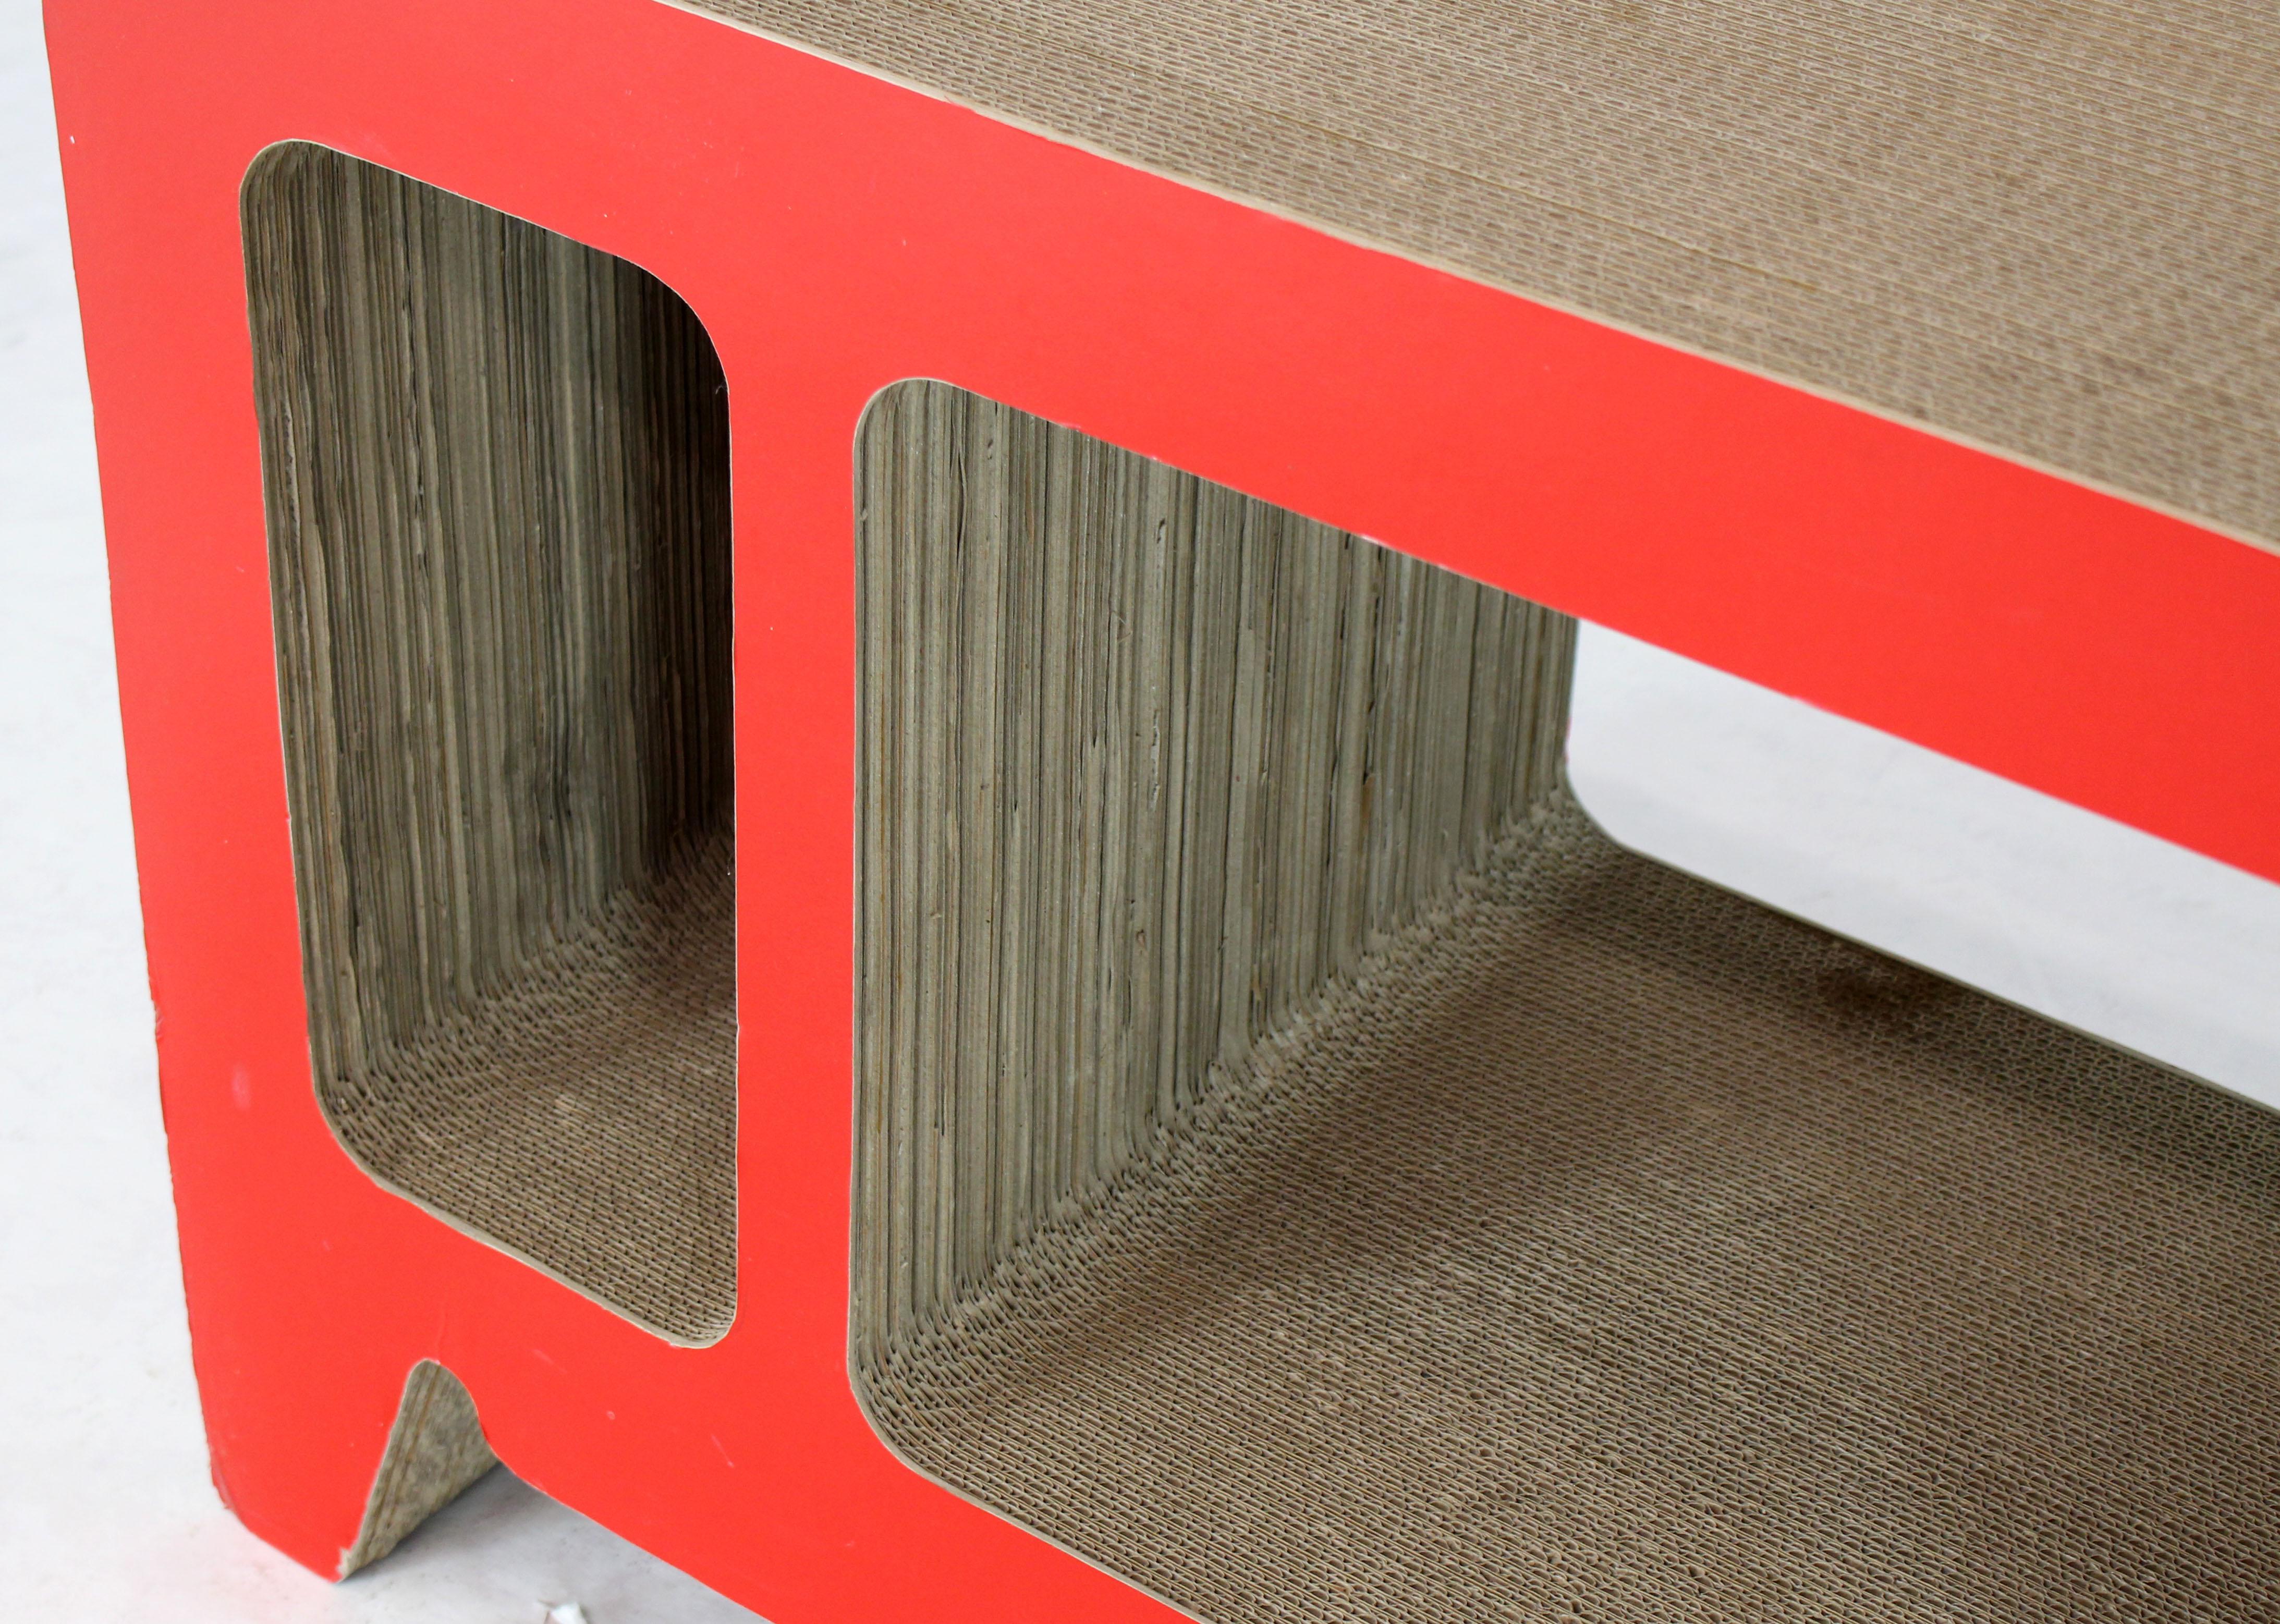 American Vintage Corrugated Cardboard Console Table